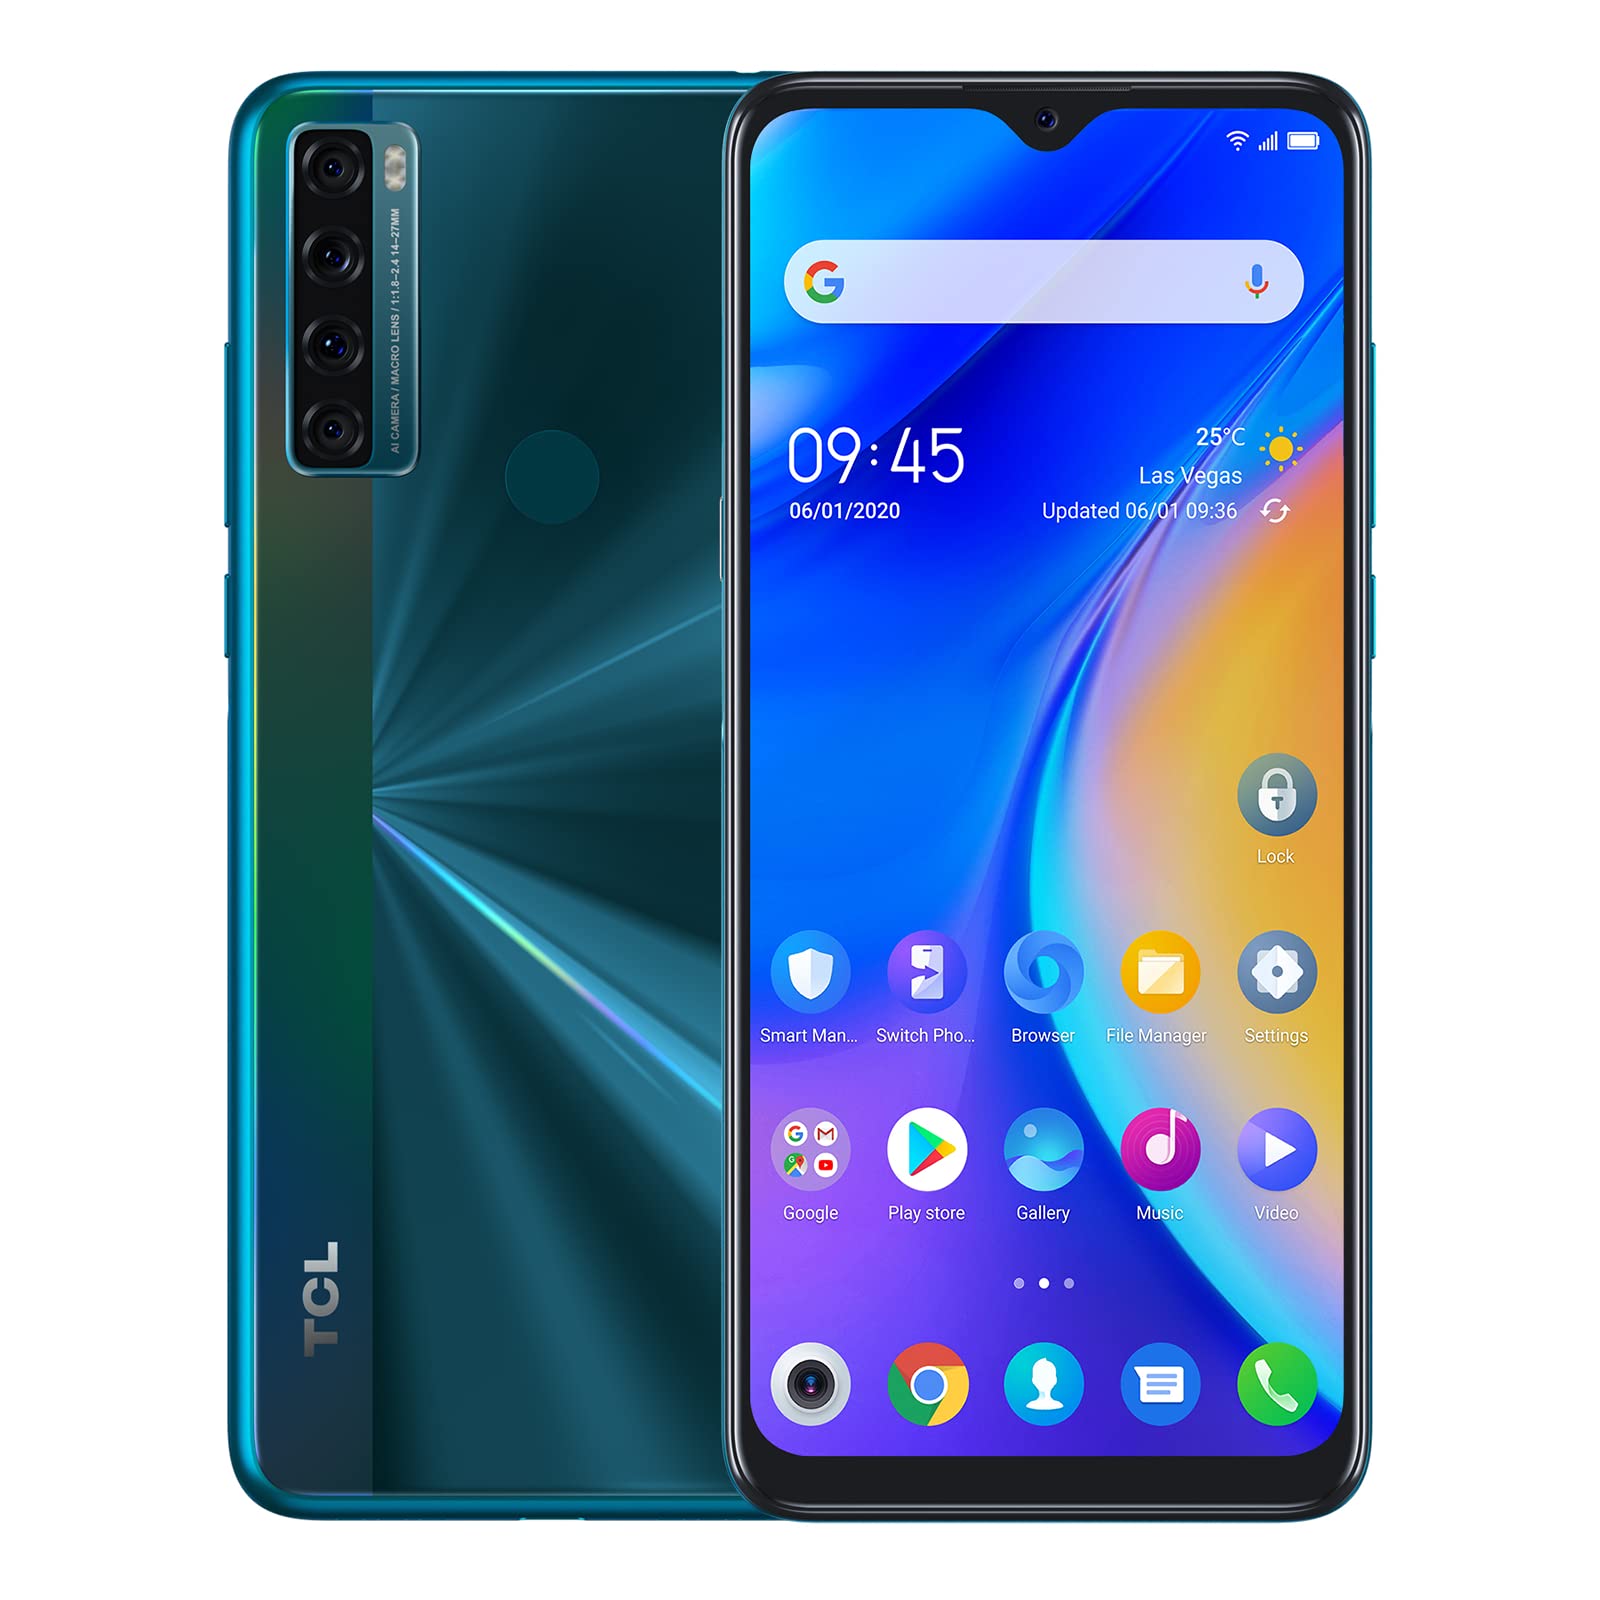 TCL 20 SE Android 11 Smartphone Unlocked Cell Phone 6.82” HD+ Display 4GB+128GB 5000mAh 48MP Quad Camera Dual Speakers Octa-Core US Verison 4G Compatible for AT&T T-Mobile (Aurora Green)